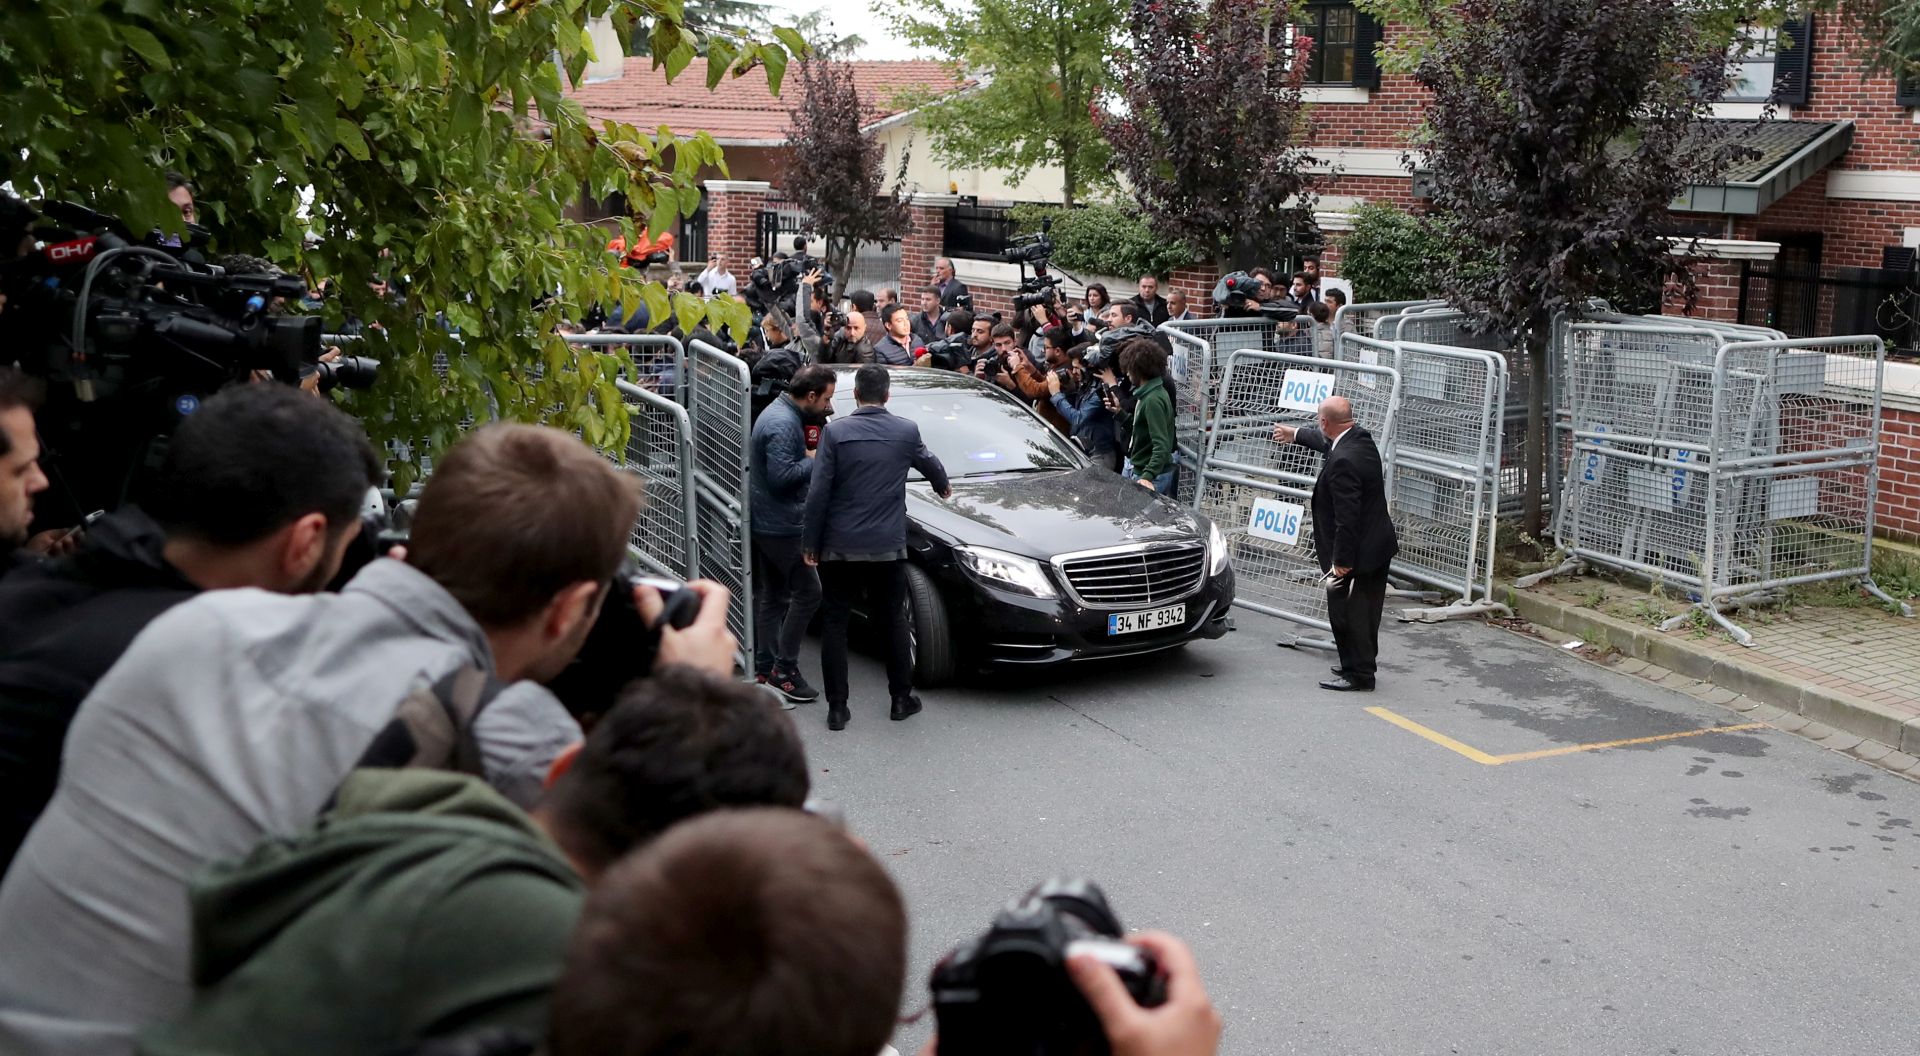 epa07095219 Saudi officials arrive for an investigation into the disappearance of Saudi journalist Jamal Khashoggi at the Saudi consulate in Istanbul, Turkey, 15 October 2018. US President Donald Trump warned on 13 October that his administration would inflict severe punishment on Saudi Arabia if the kingdom was found to have played a part in the disappearance of Saudi journalist Jamal Khashoggi who has gone missing after visiting the Saudi consulate in Istanbul on 02 October to complete routine paperwork.  EPA/TOLGA BOZOGLU